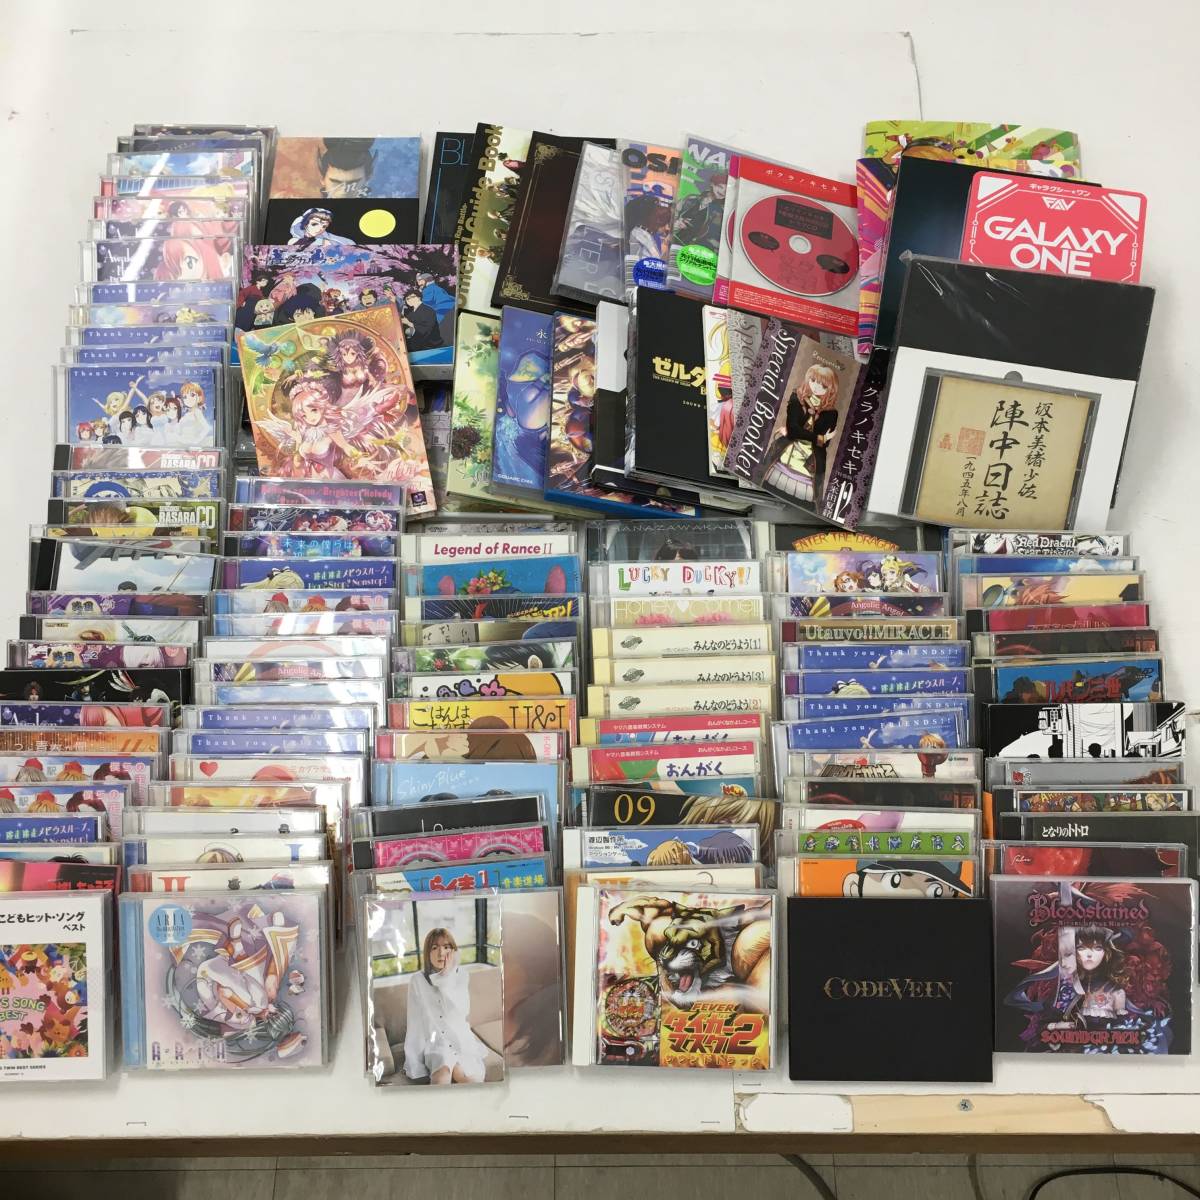  anime song soundtrack nursery rhyme Ghibli CD large amount set sale Rav Live Sengoku BASARA other * -ply . equipped * case damage equipped [ secondhand goods ]